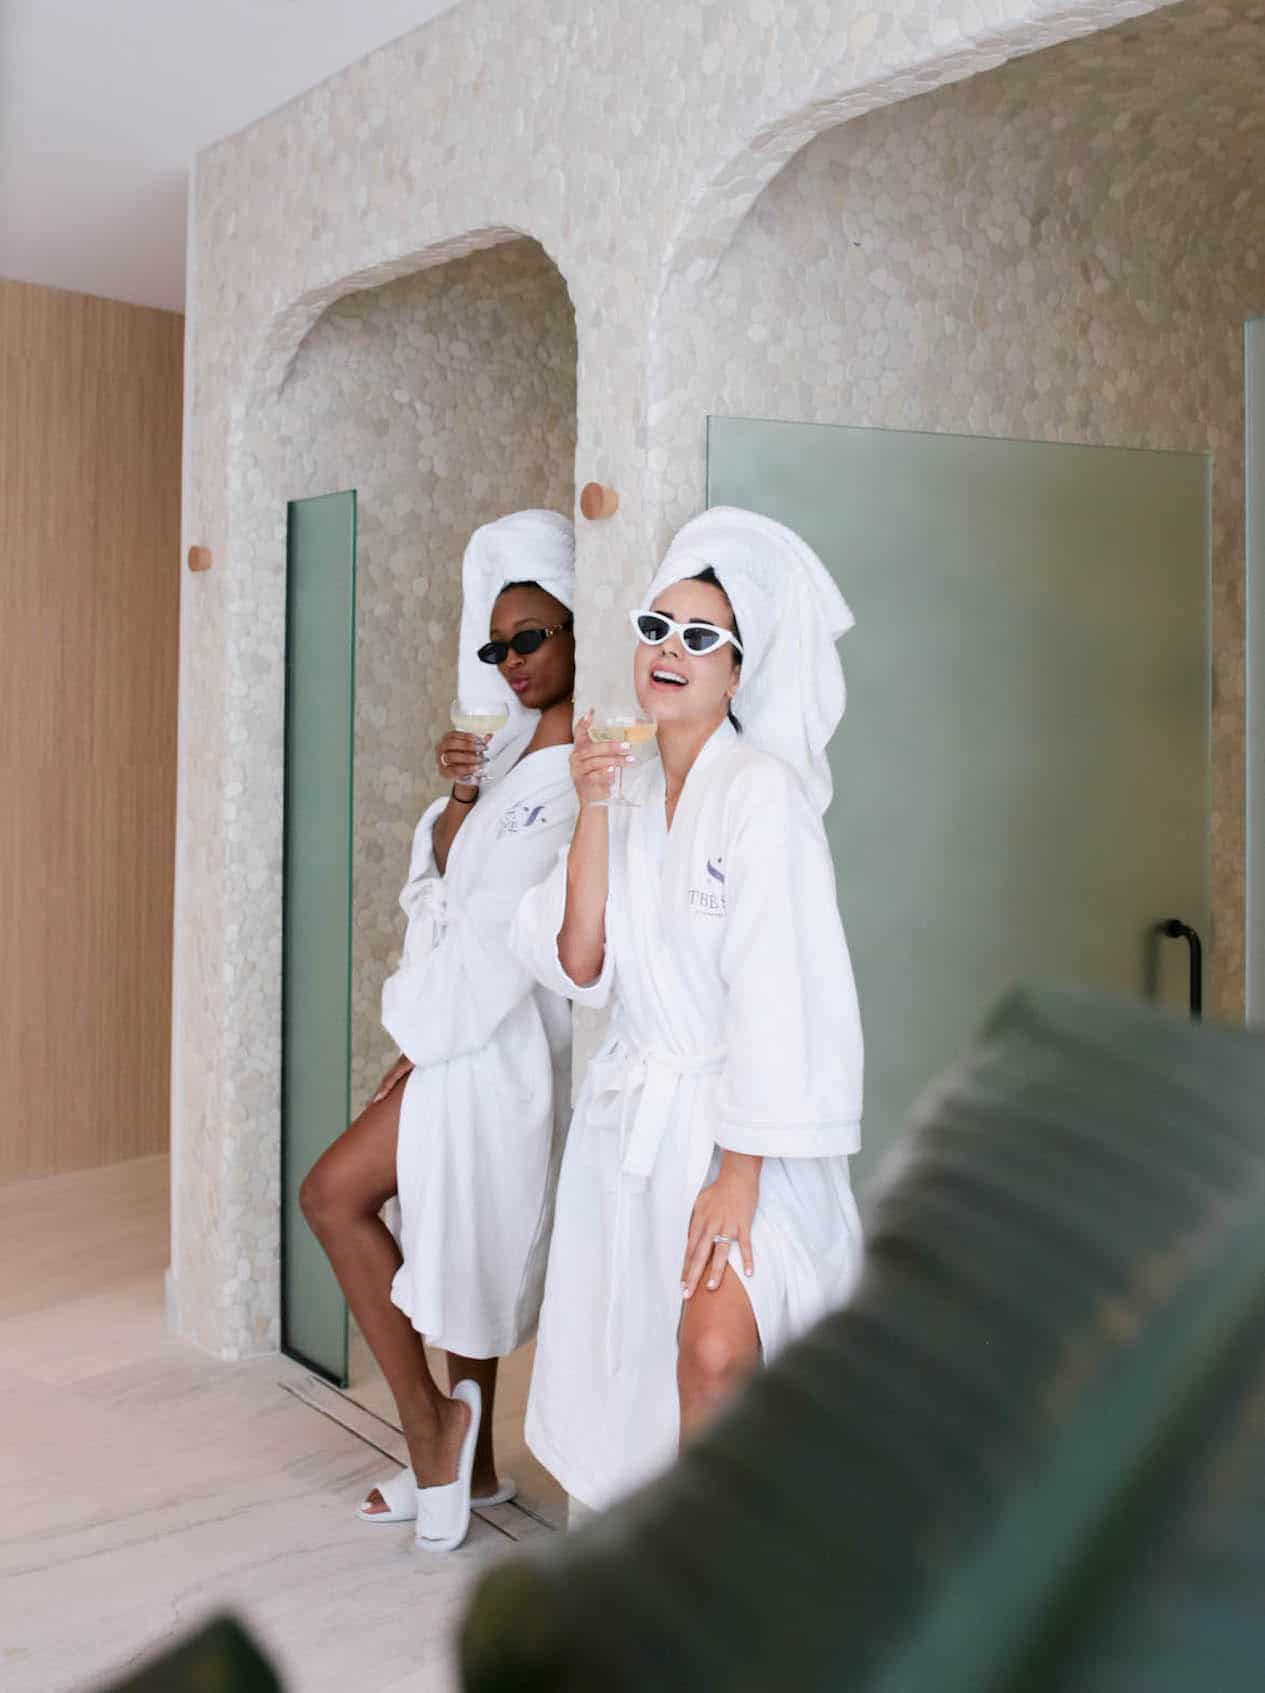 image of two women dressed in white robes with towels on their heads in a spa shower room